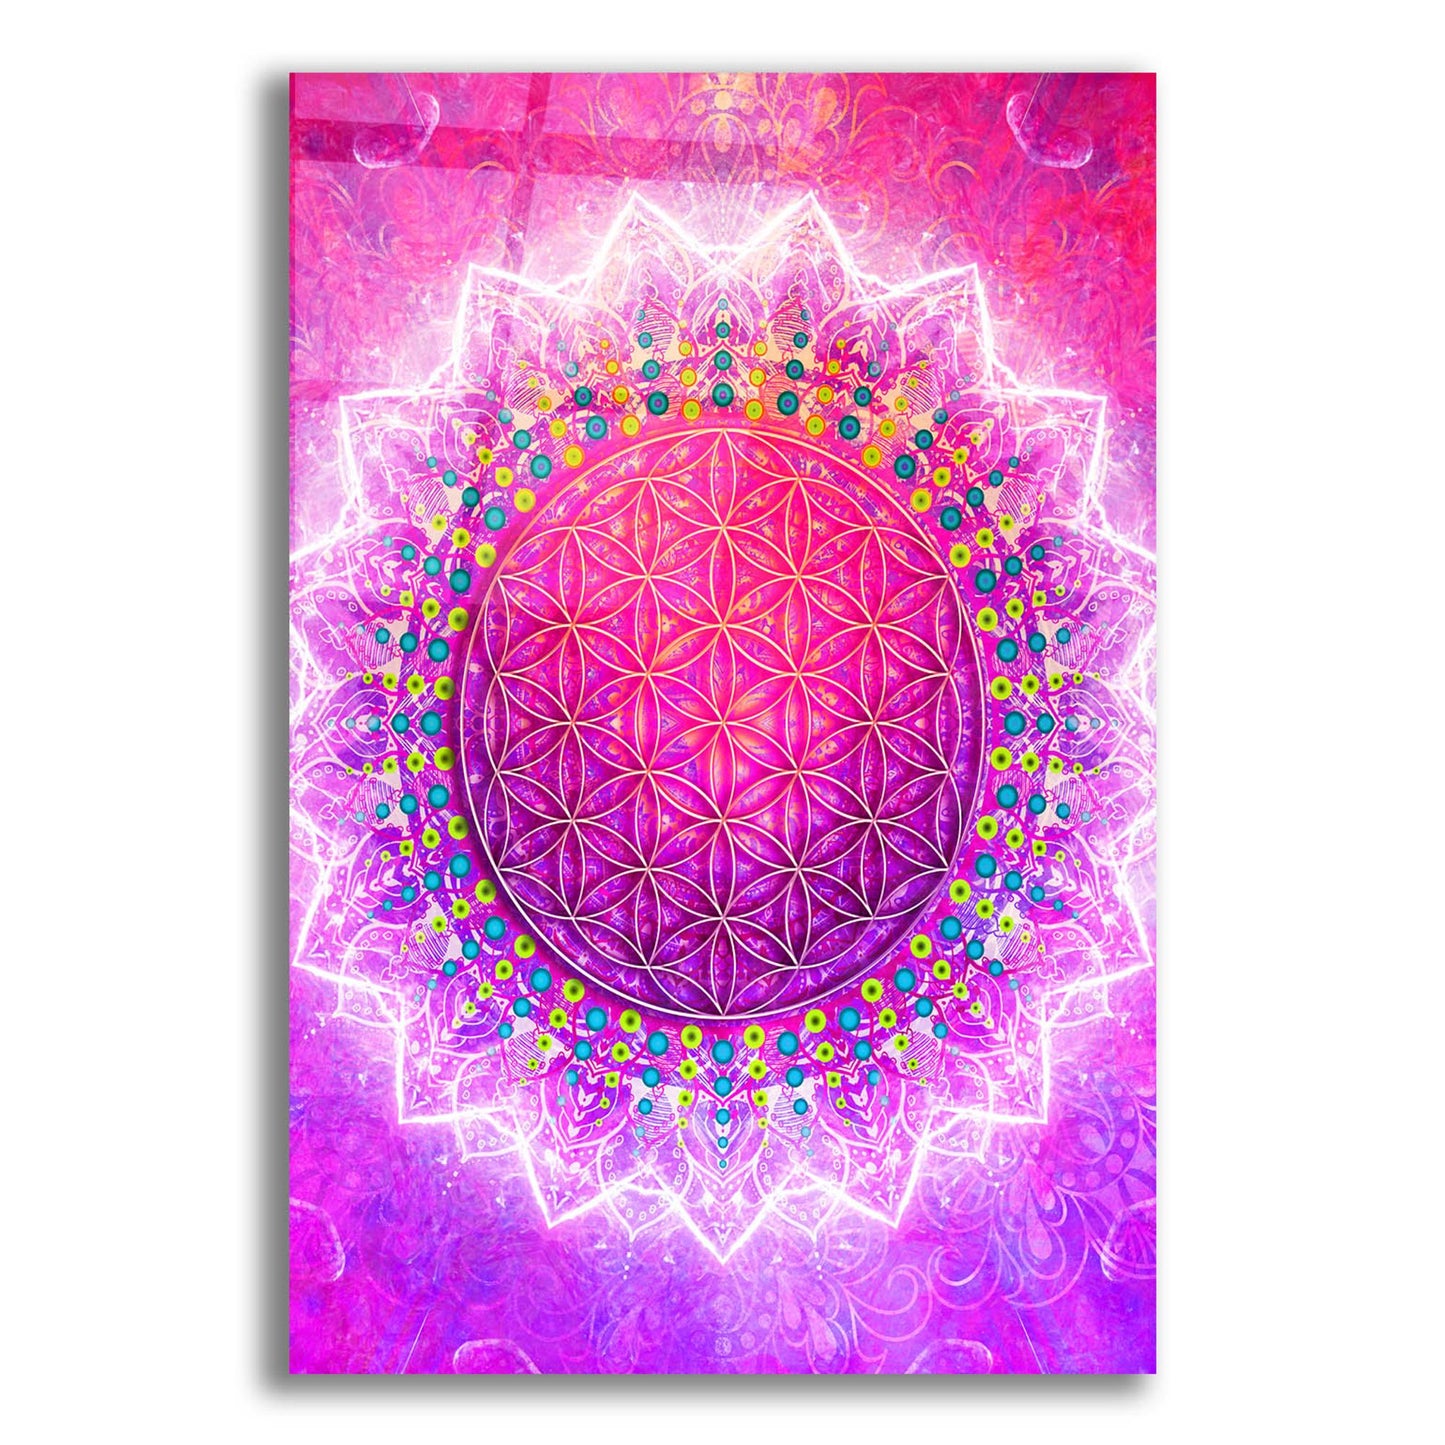 Epic Art 'Flower Of Life' by Cameron Gray, Acrylic Glass Wall Art